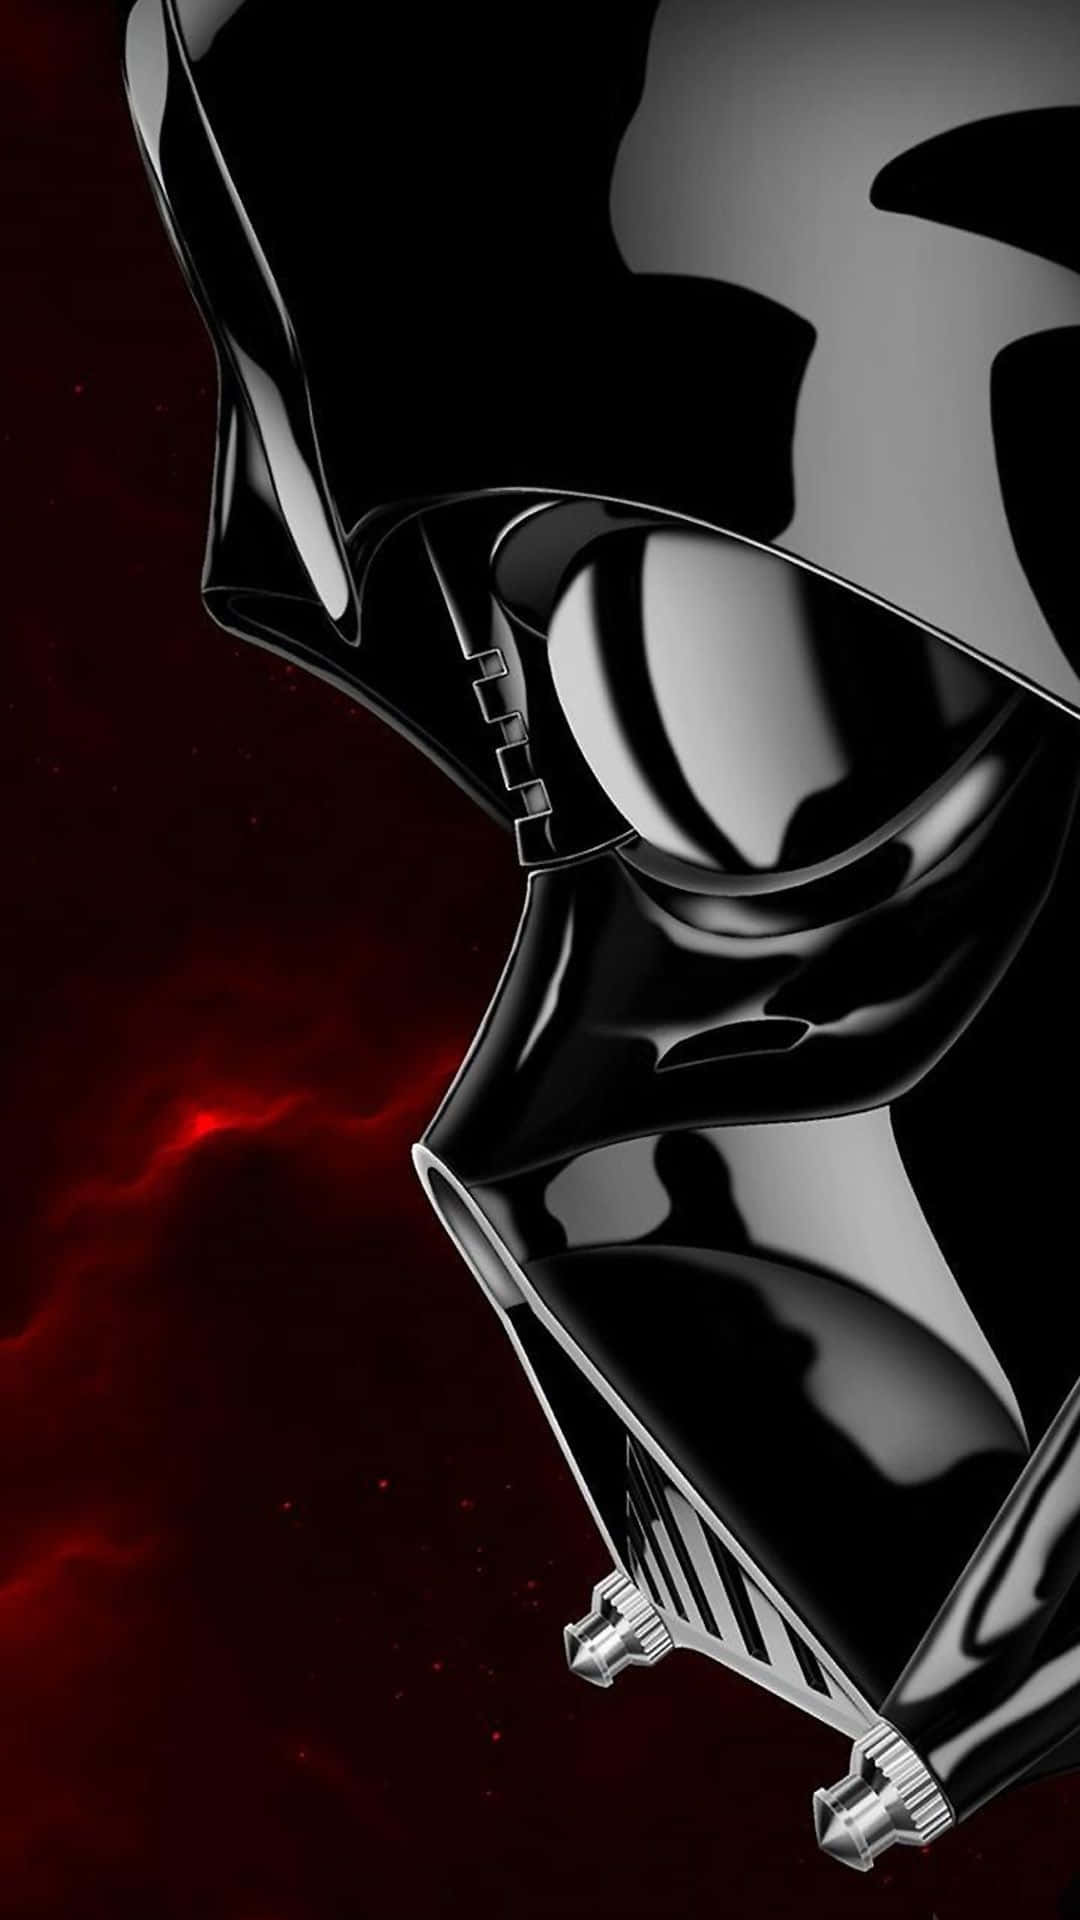 Get Your Hands on the All-New Darth Vader-themed Iphone Wallpaper